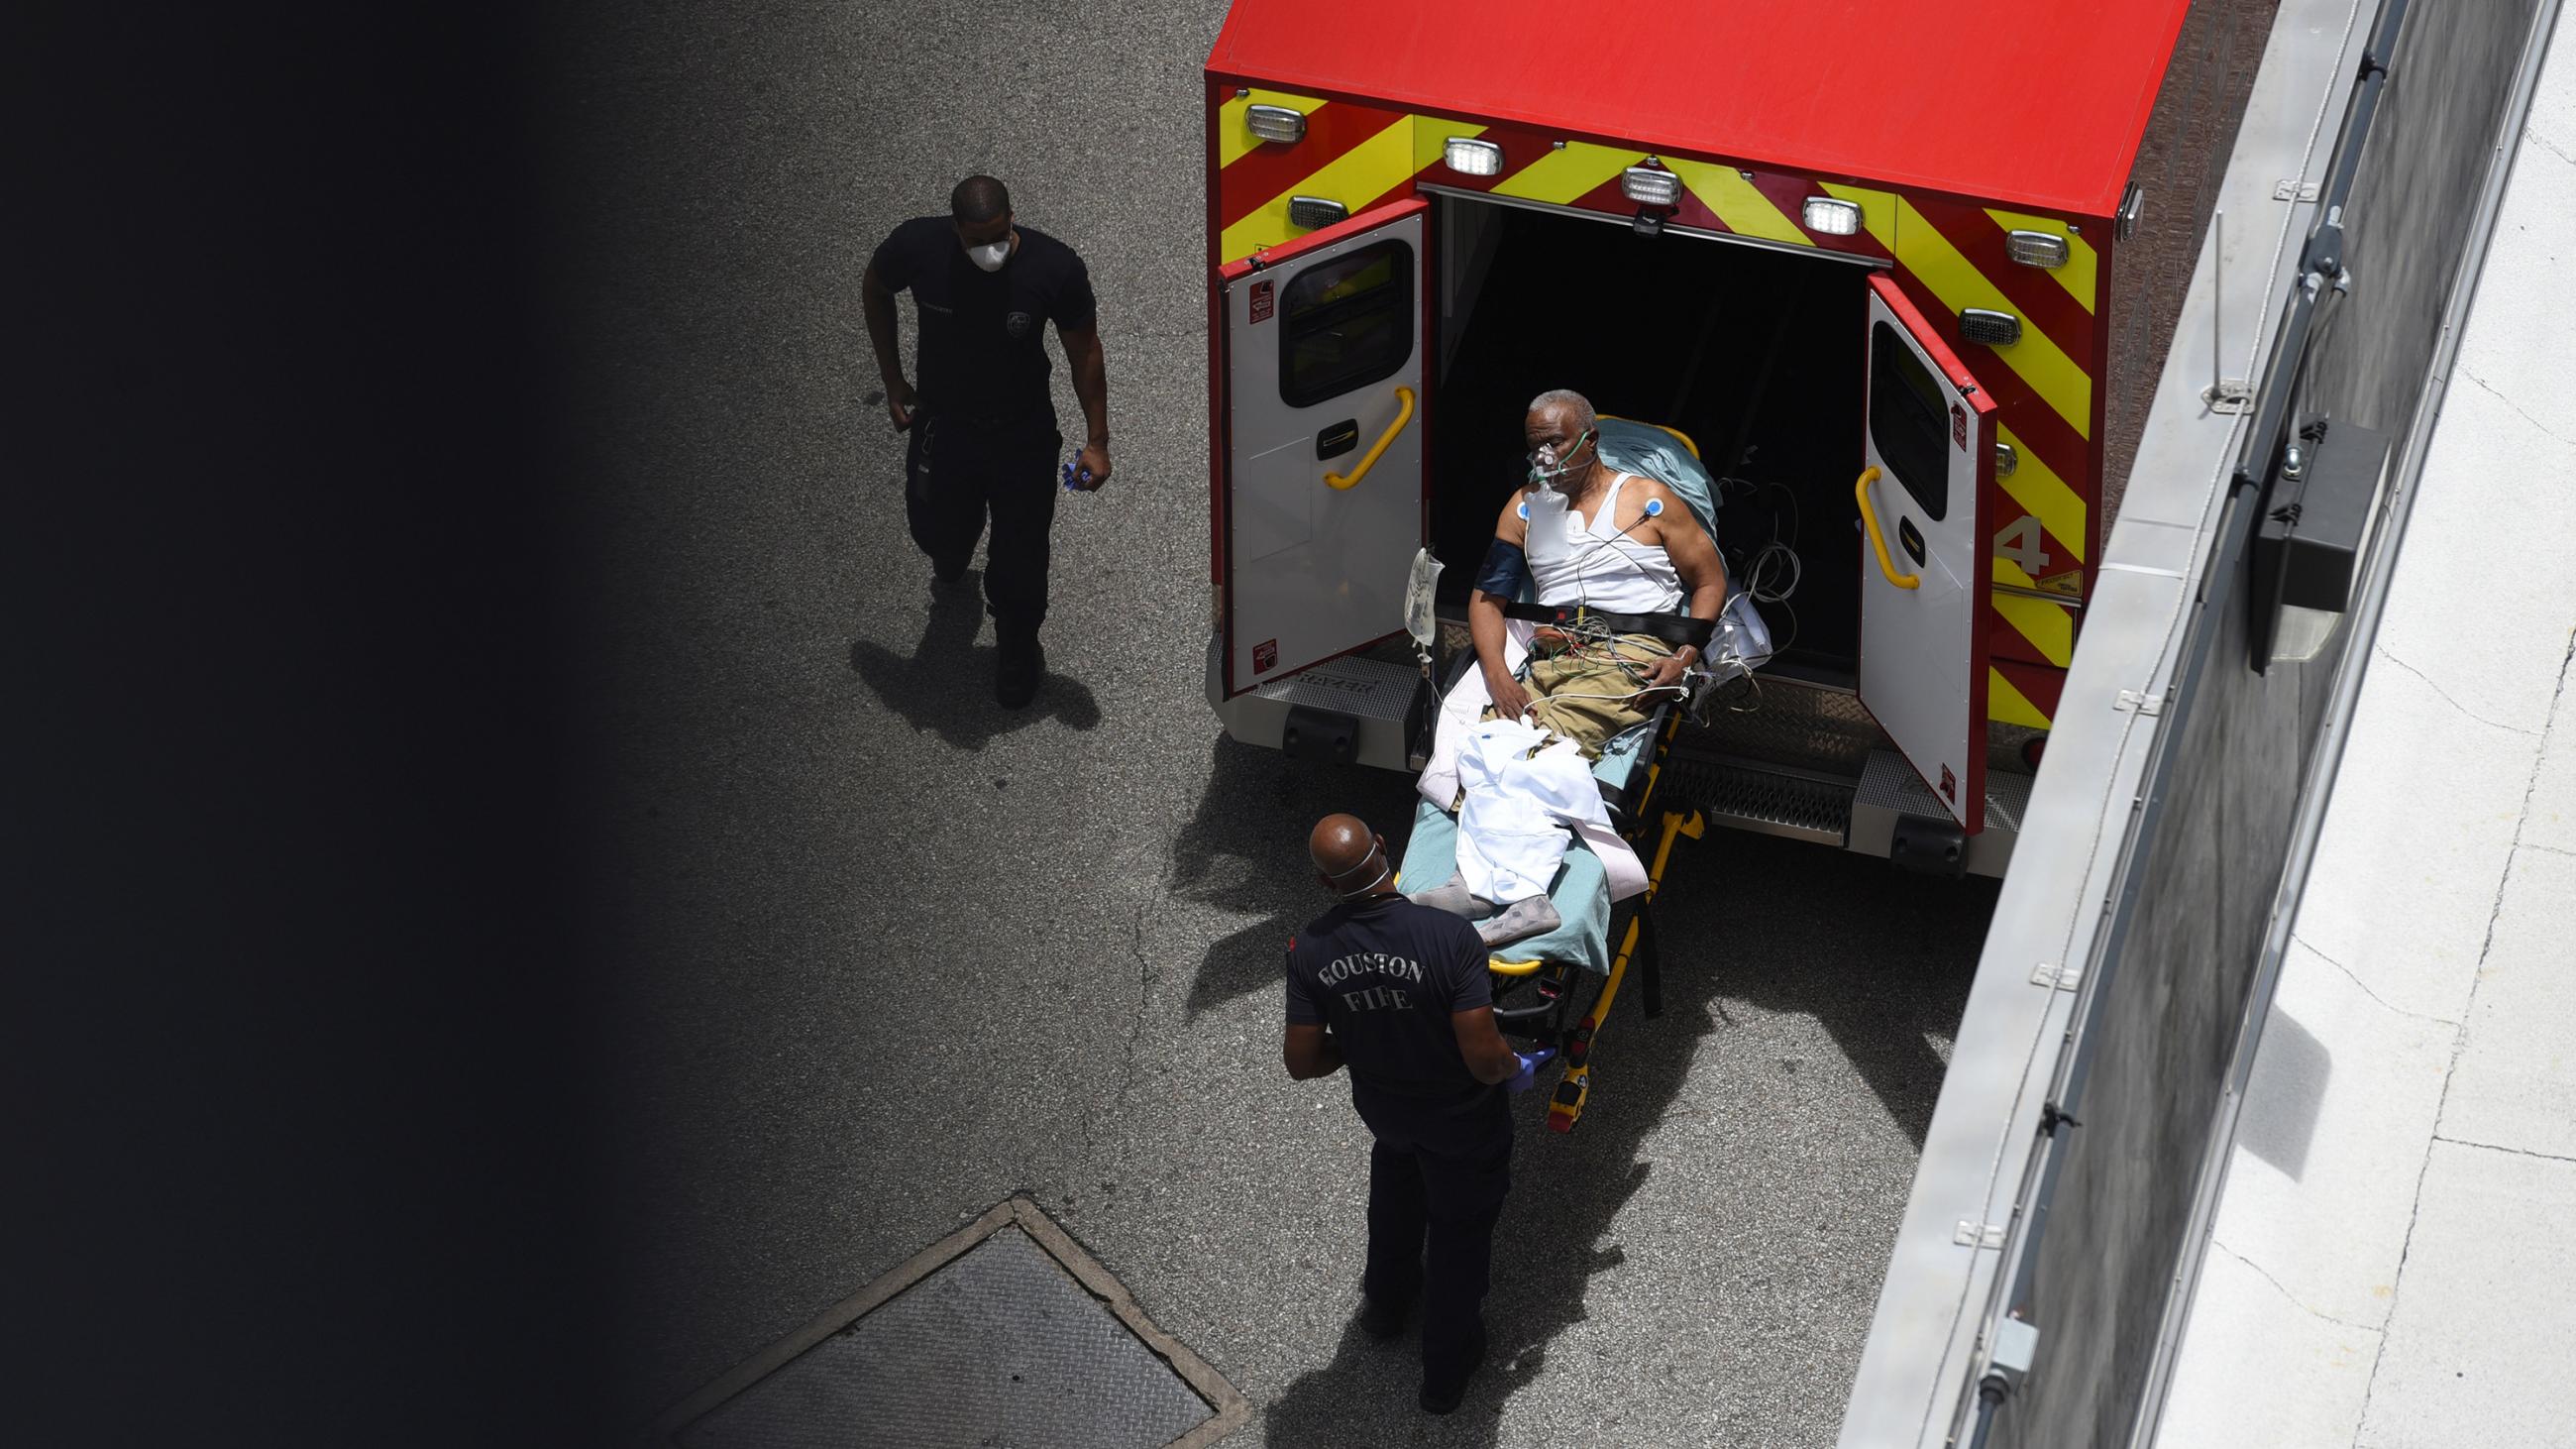 The photo shows a person on a gurney being taken out of the back of an ambulance in a picture captured from above. 